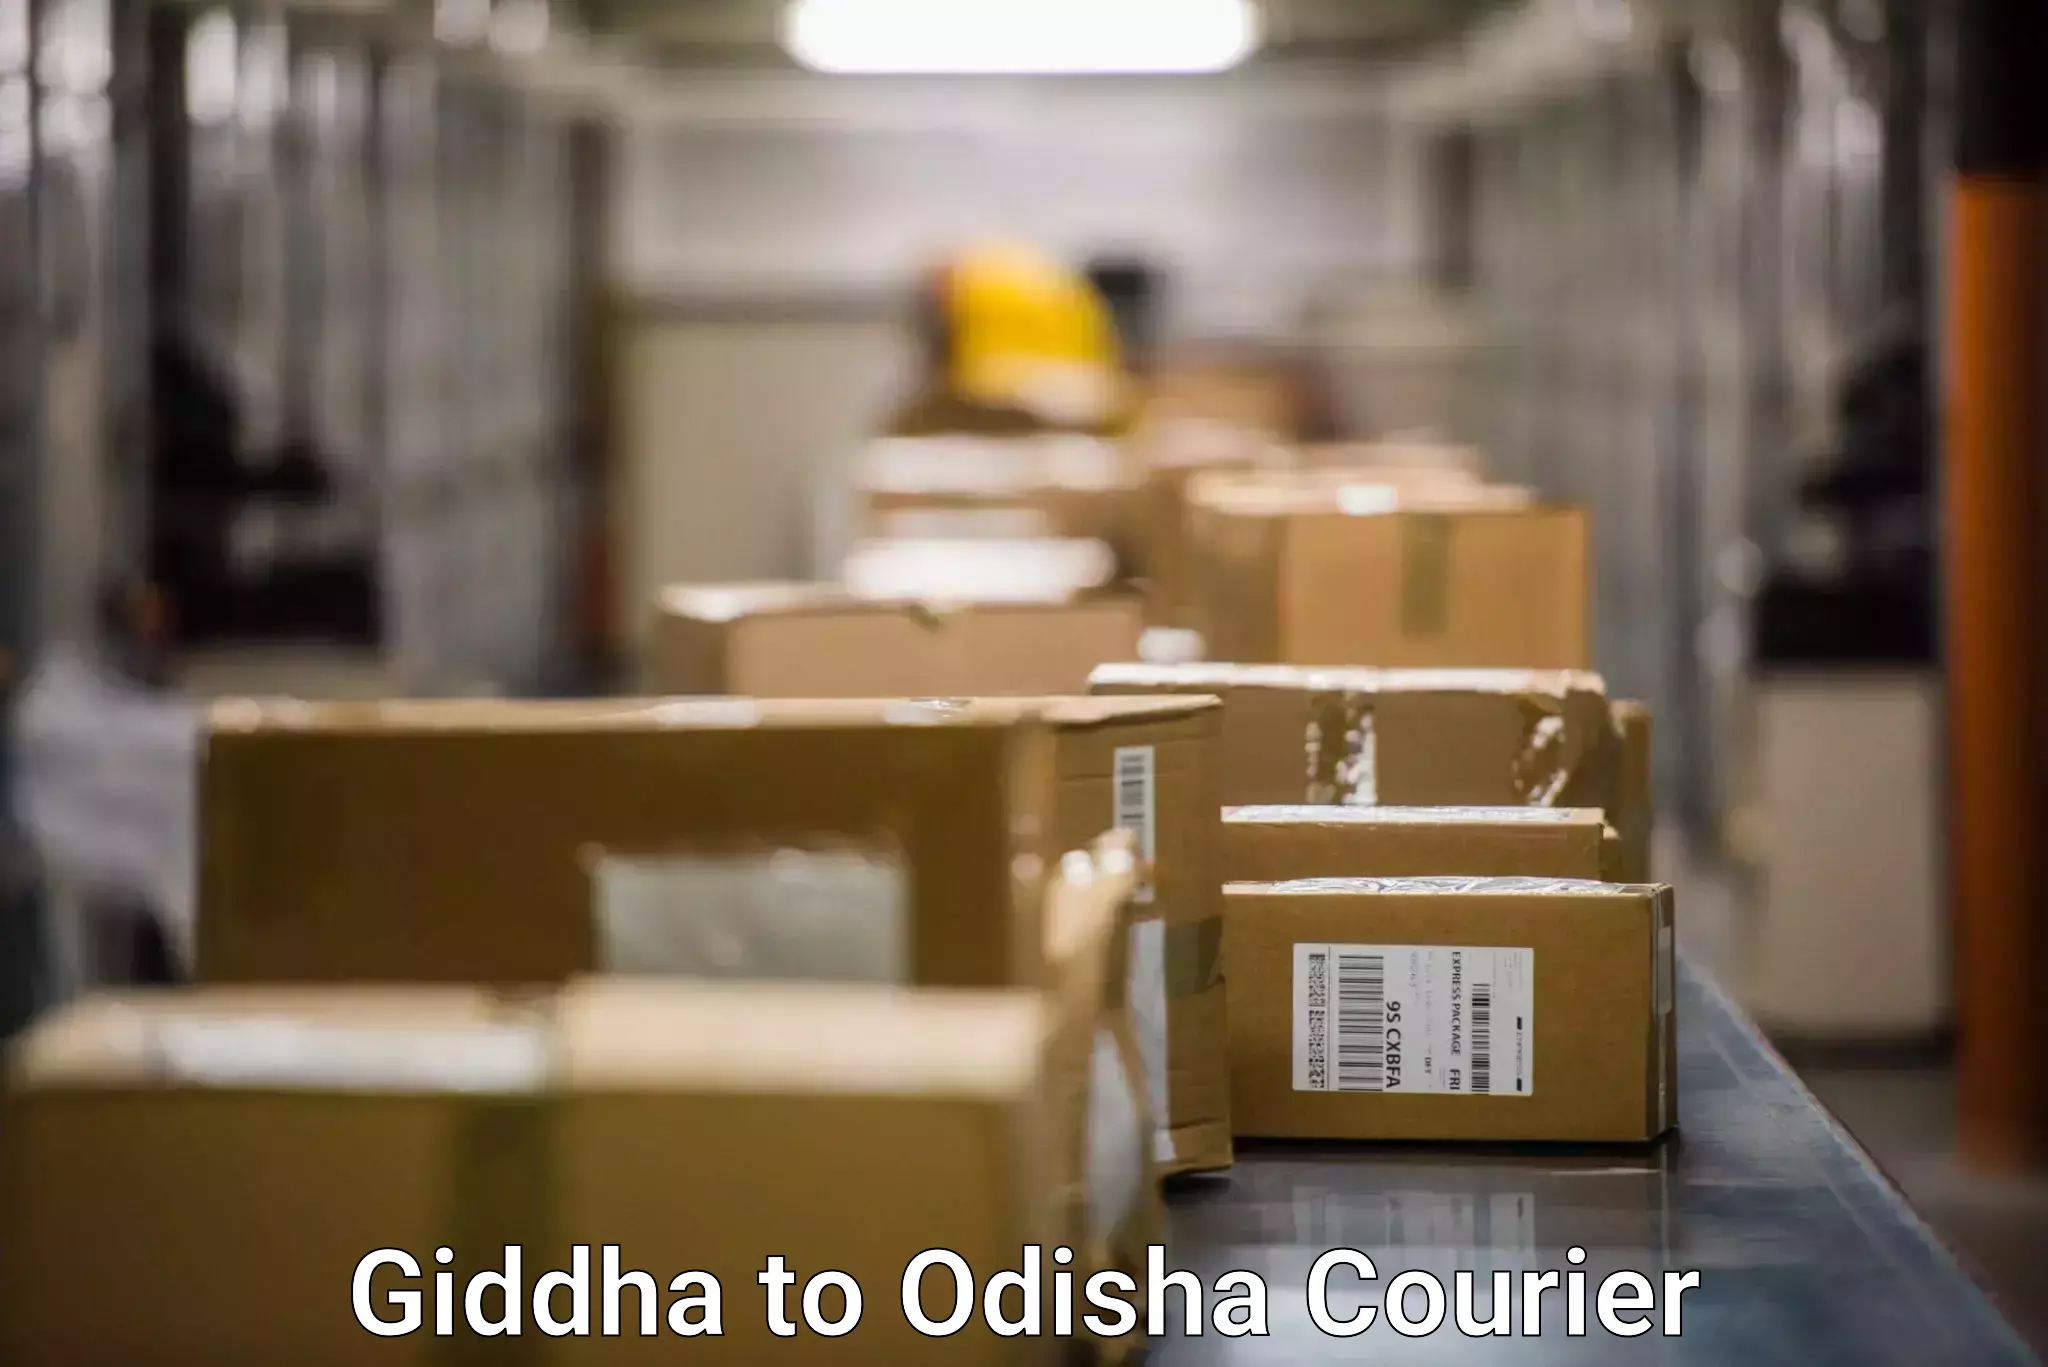 Express delivery capabilities Giddha to Odisha